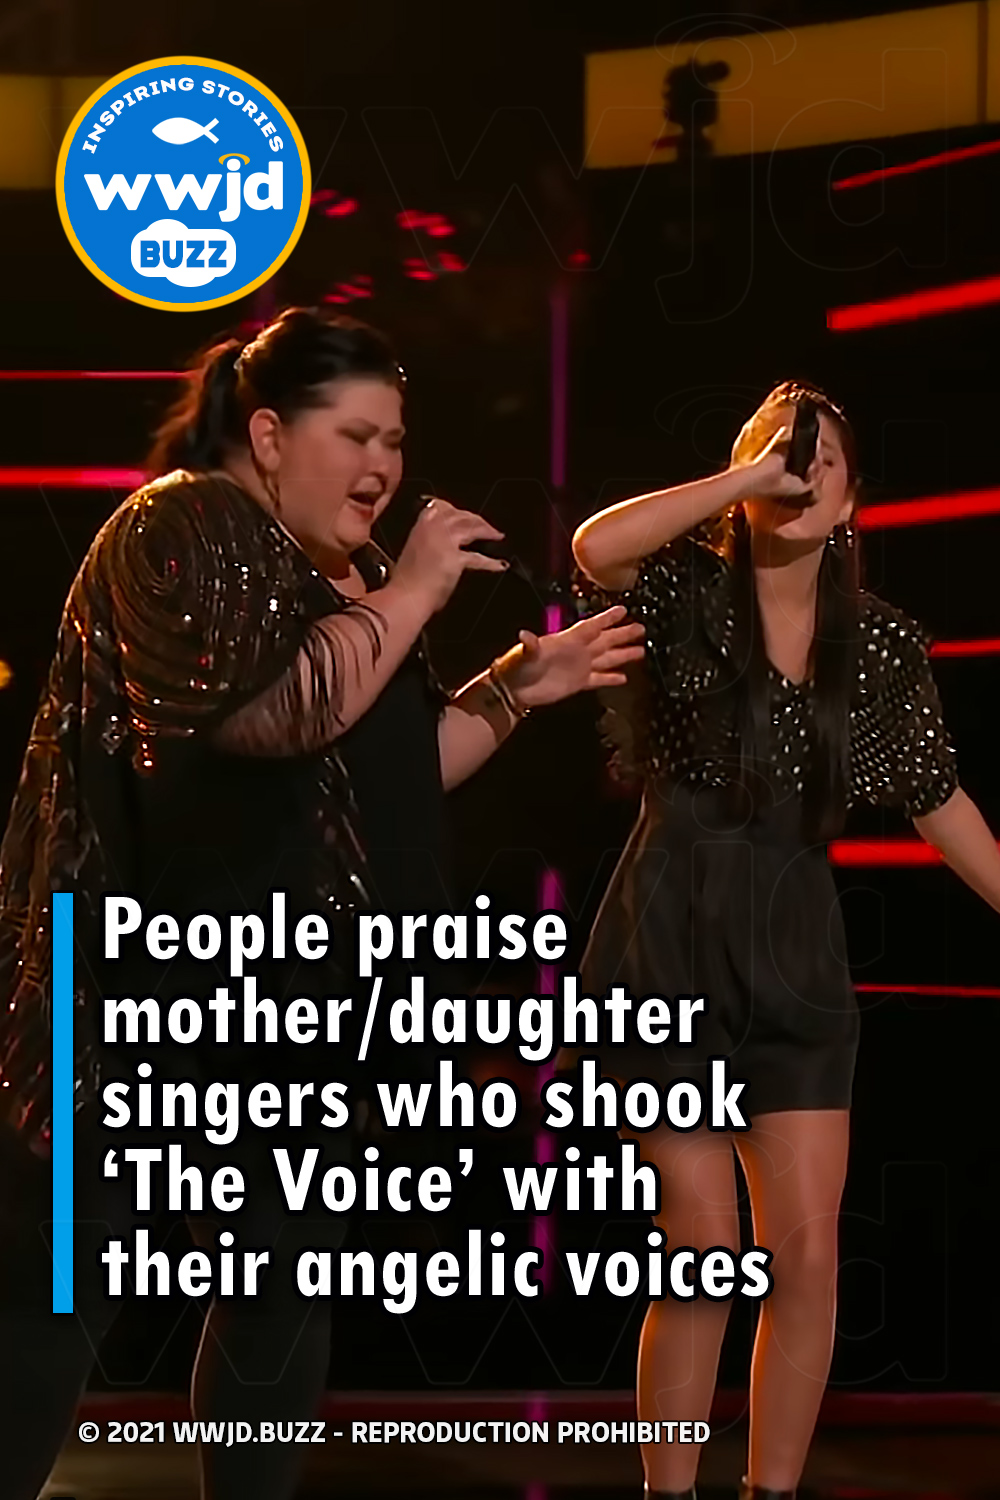 People praise mother/daughter singers who shook ‘The Voice’ with their angelic voices